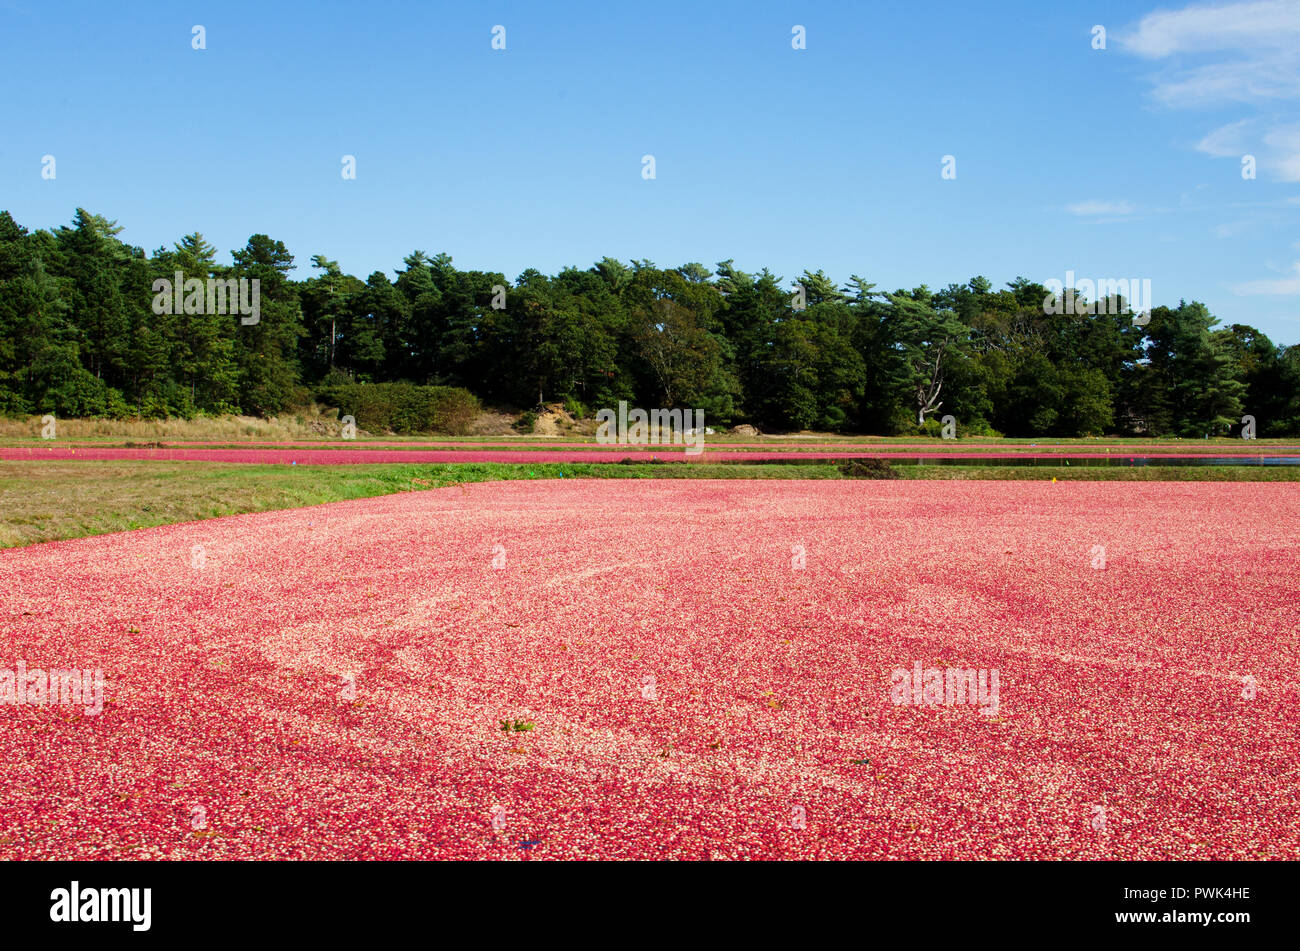 Wareham, Massachusetts, USA, 16 October, 2018, Cranberry bogs which have been flooded with red, ripe, cranberries floating on surface ready for harvesting. Credit: Michael Neelon/Alamy Live News Stock Photo